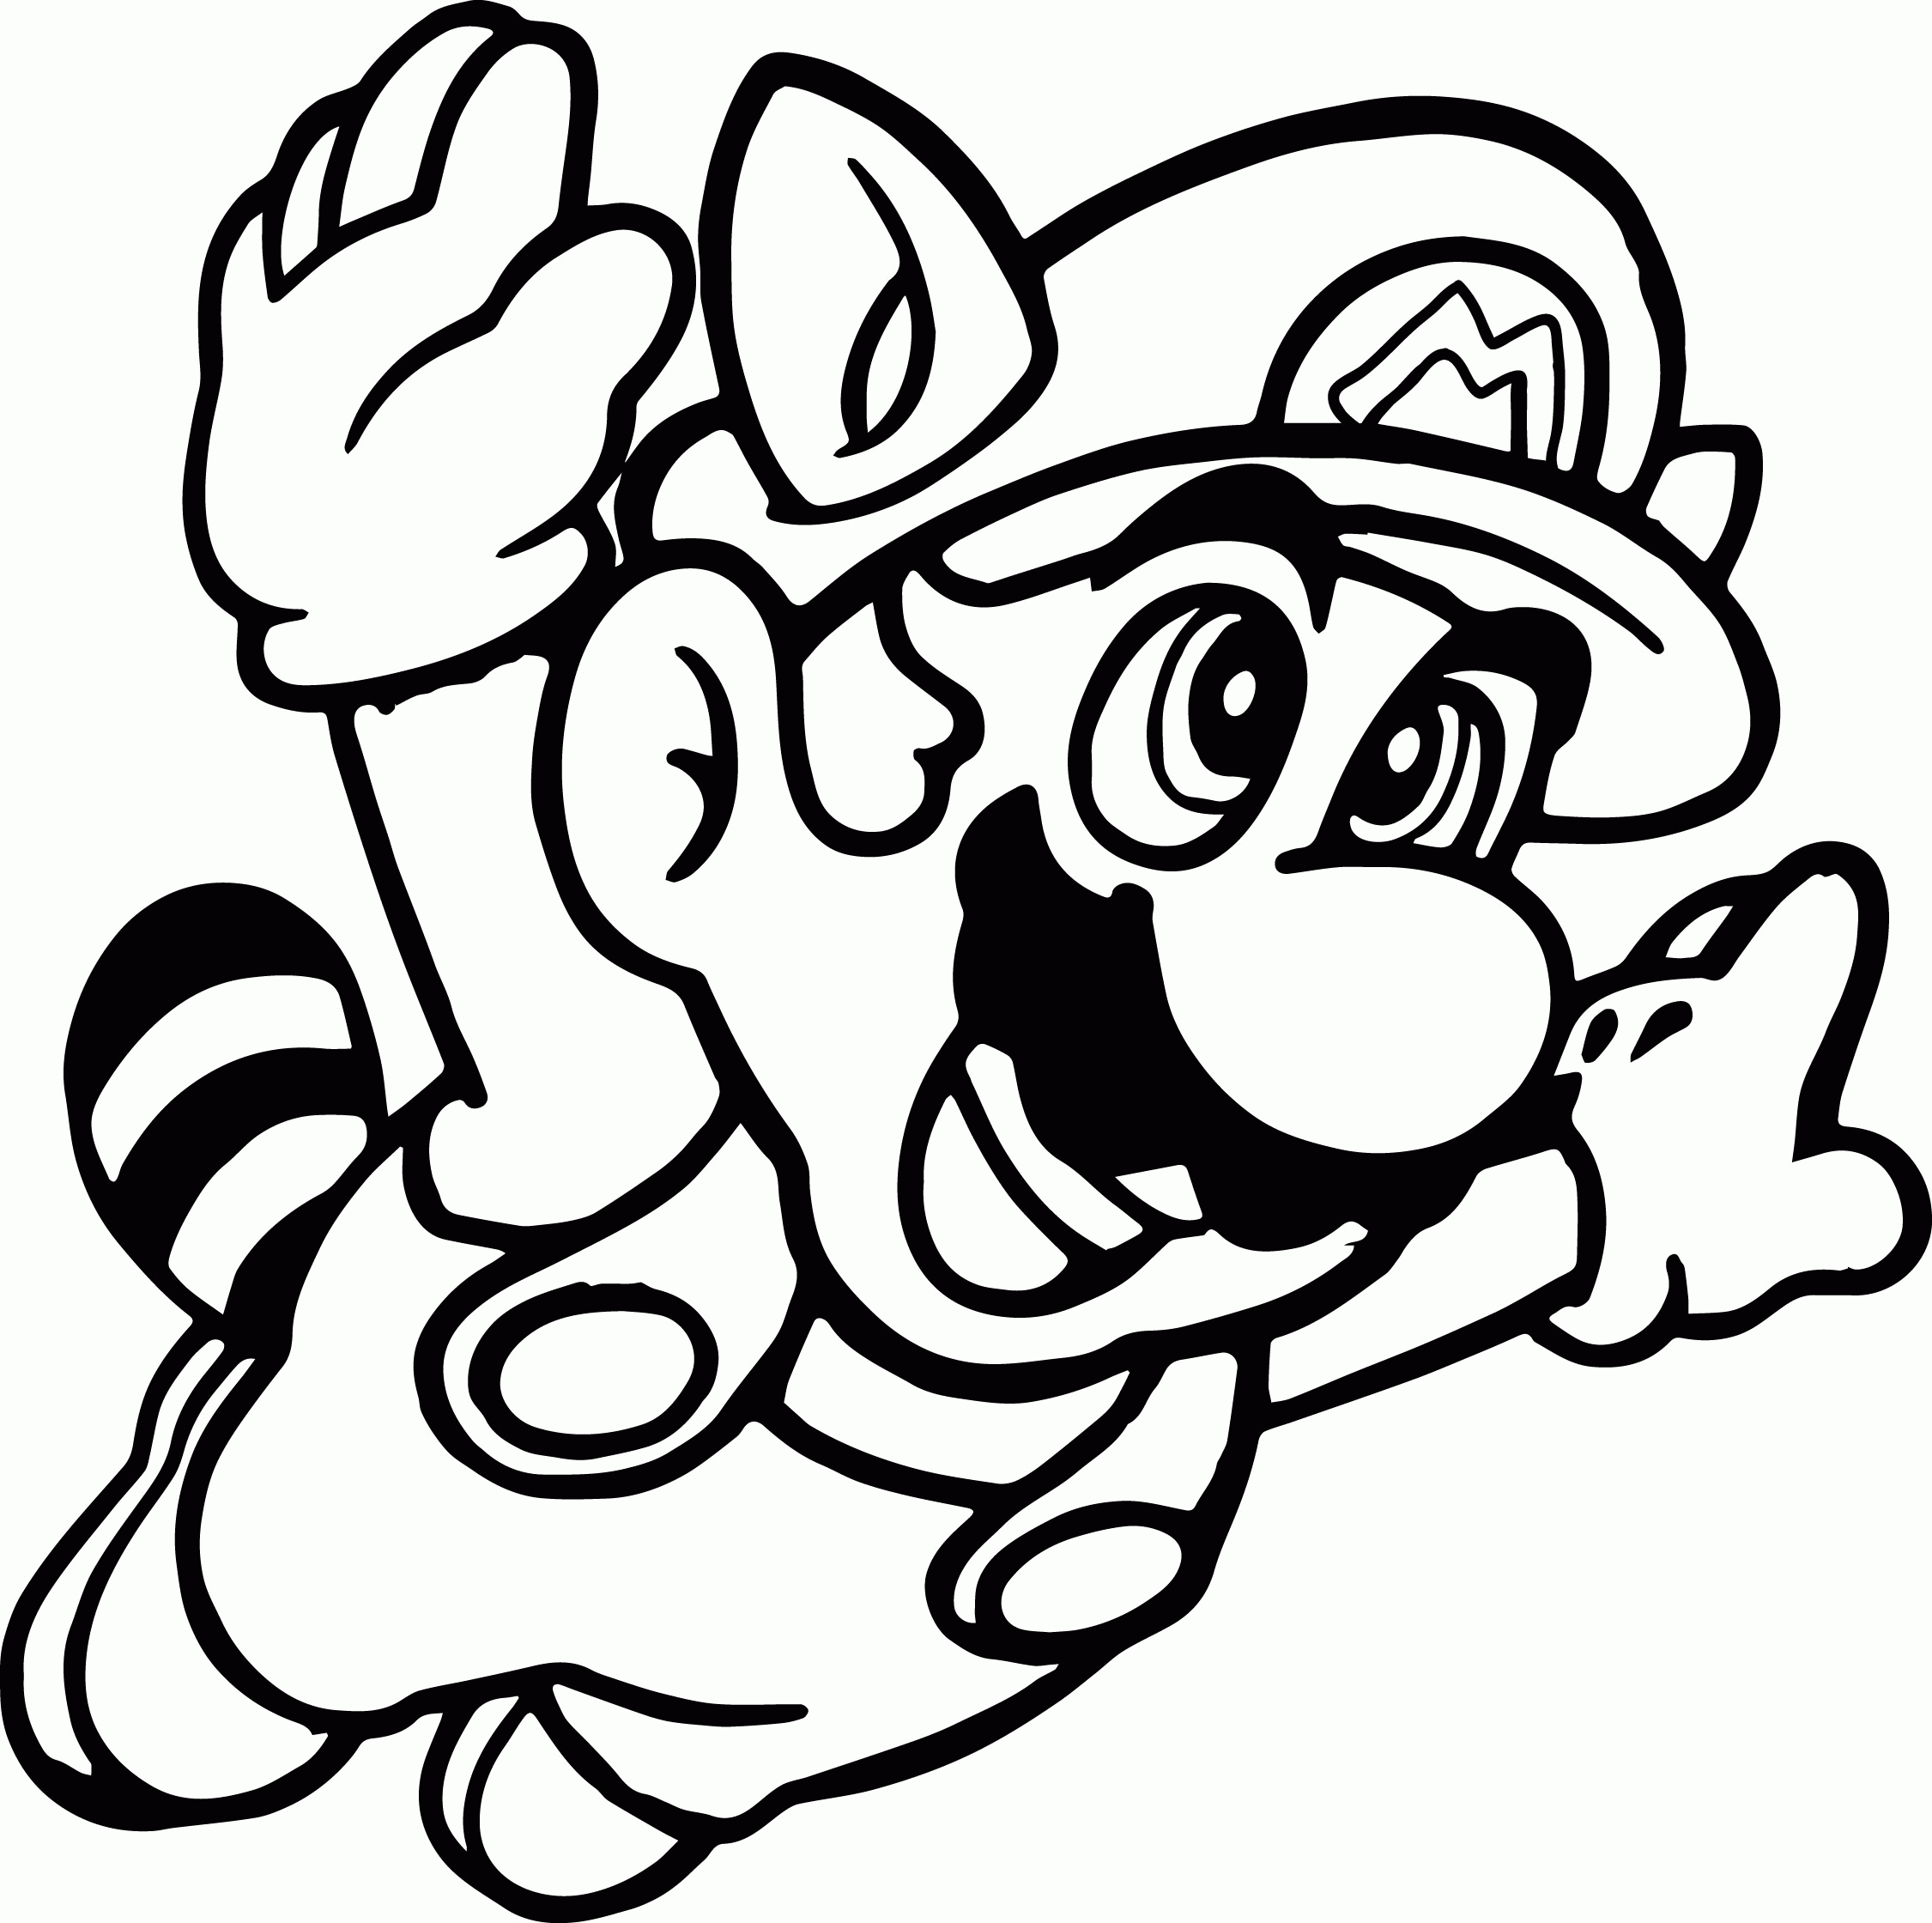 Coloring Pages Online Mario - my coloring books pages